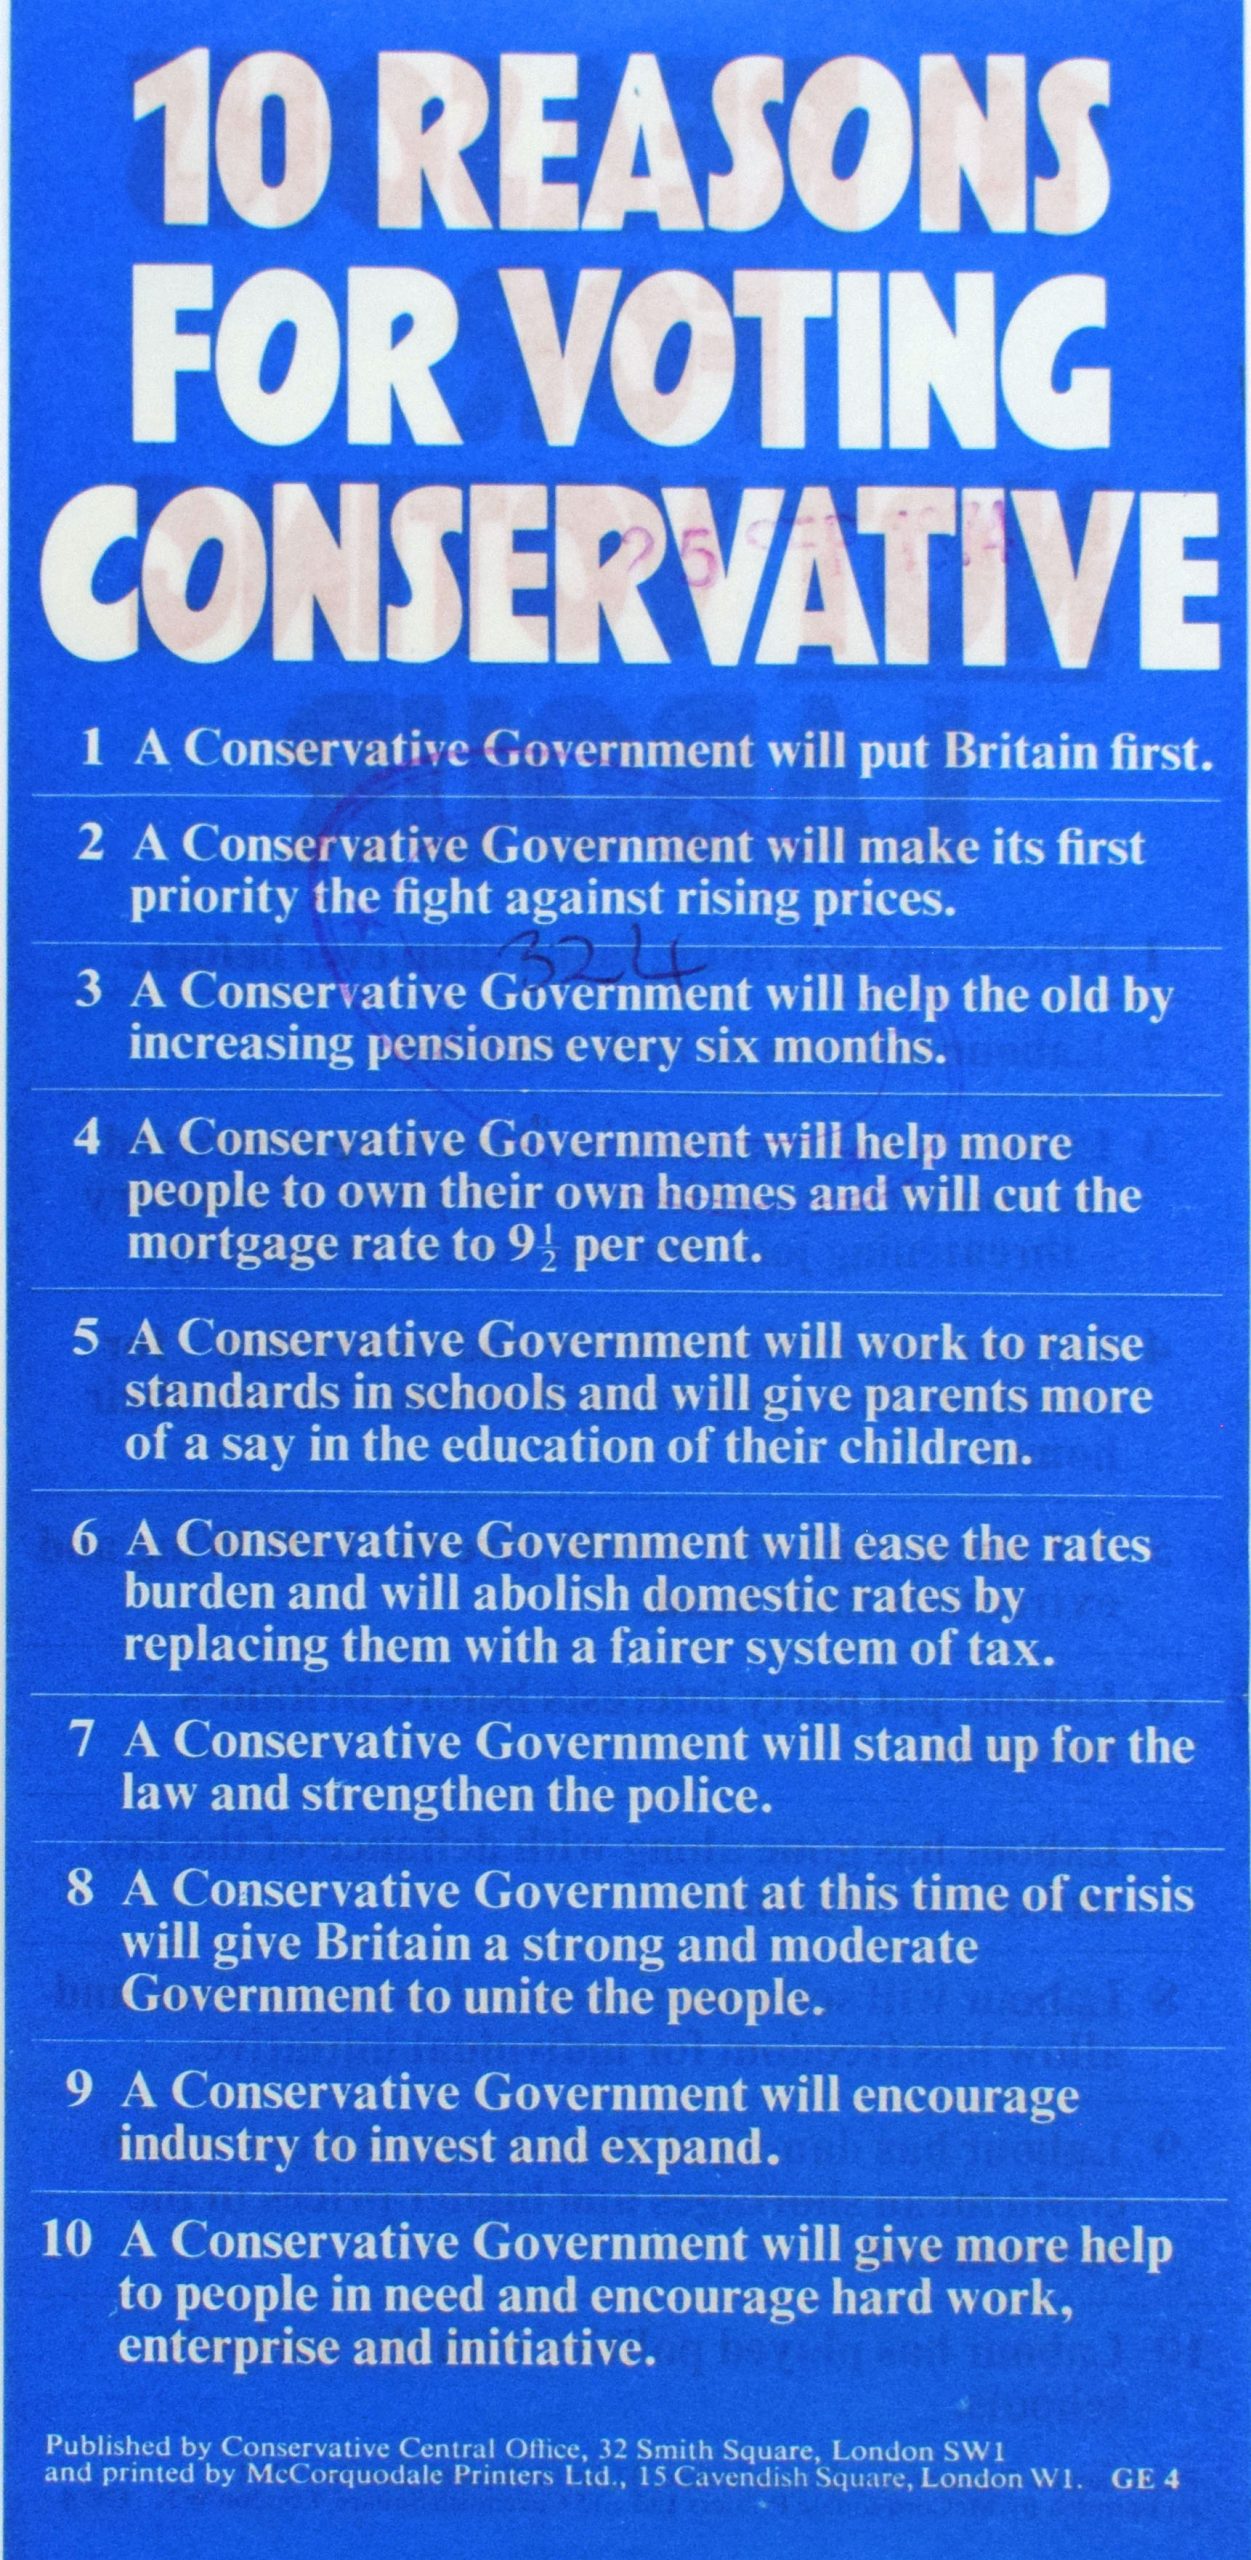 A portrait blue leaflet with white text including: '10 Reasons For Voting Conservative', followed by ten points.